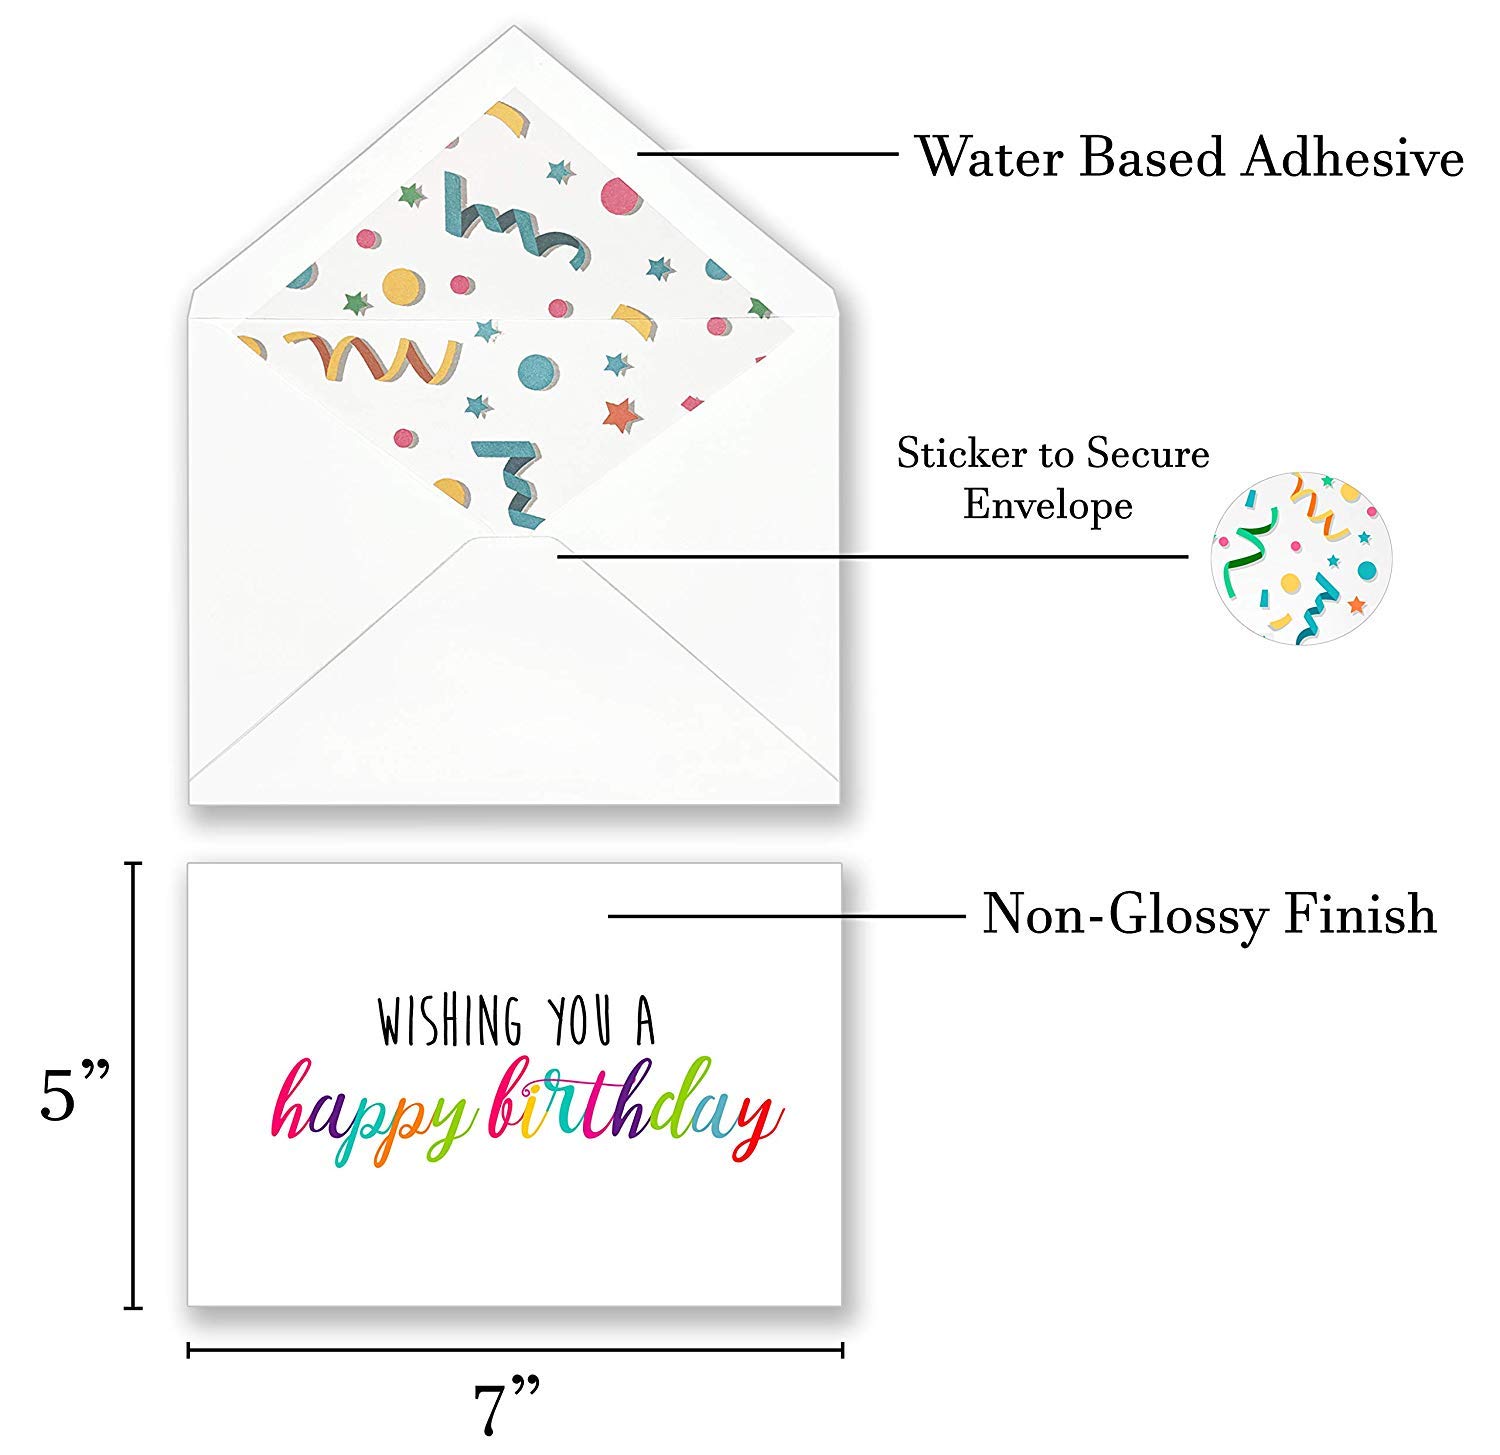 100 Happy Birthday Cards Bulk, Large 5x7 Inch Assorted, with Envelopes ,Stickers and Simple Greetings Inside , 10 Unique Designs, Thick Card Stock Box Set